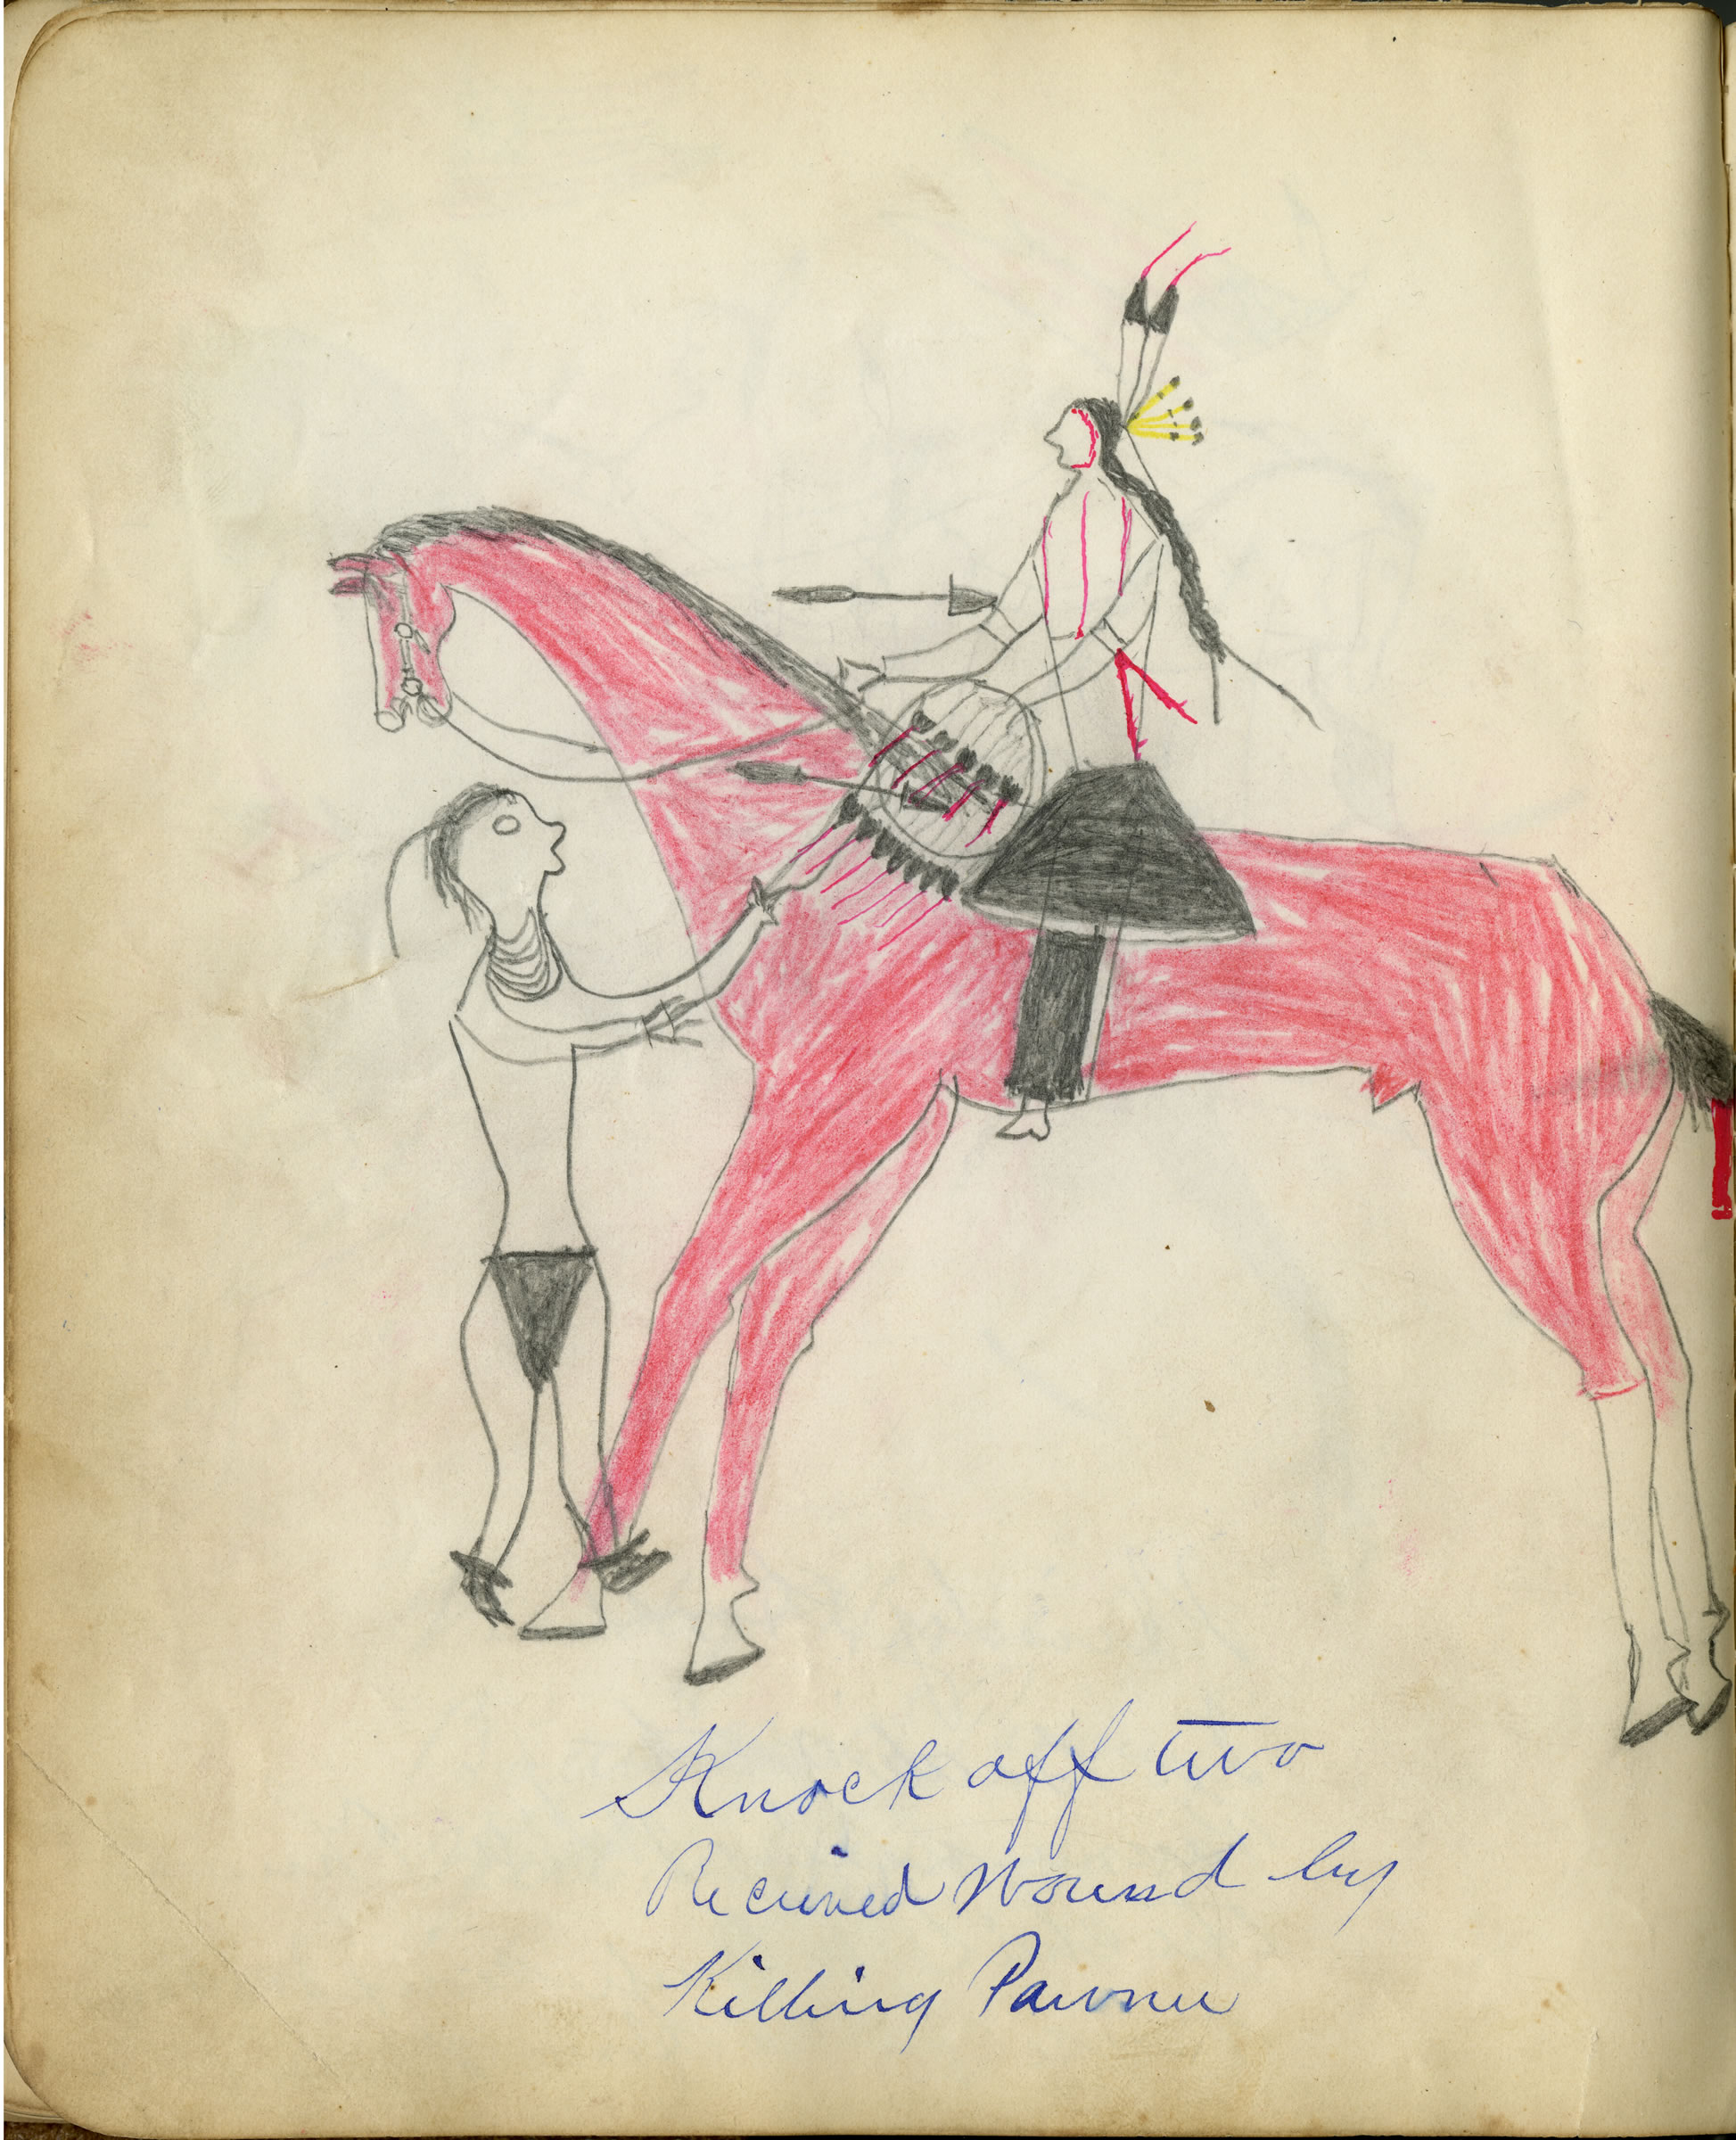 Fales-Freeman Brulé Ledger: Plate 10 Knock Off Two Received Wound by Killing Pawnee